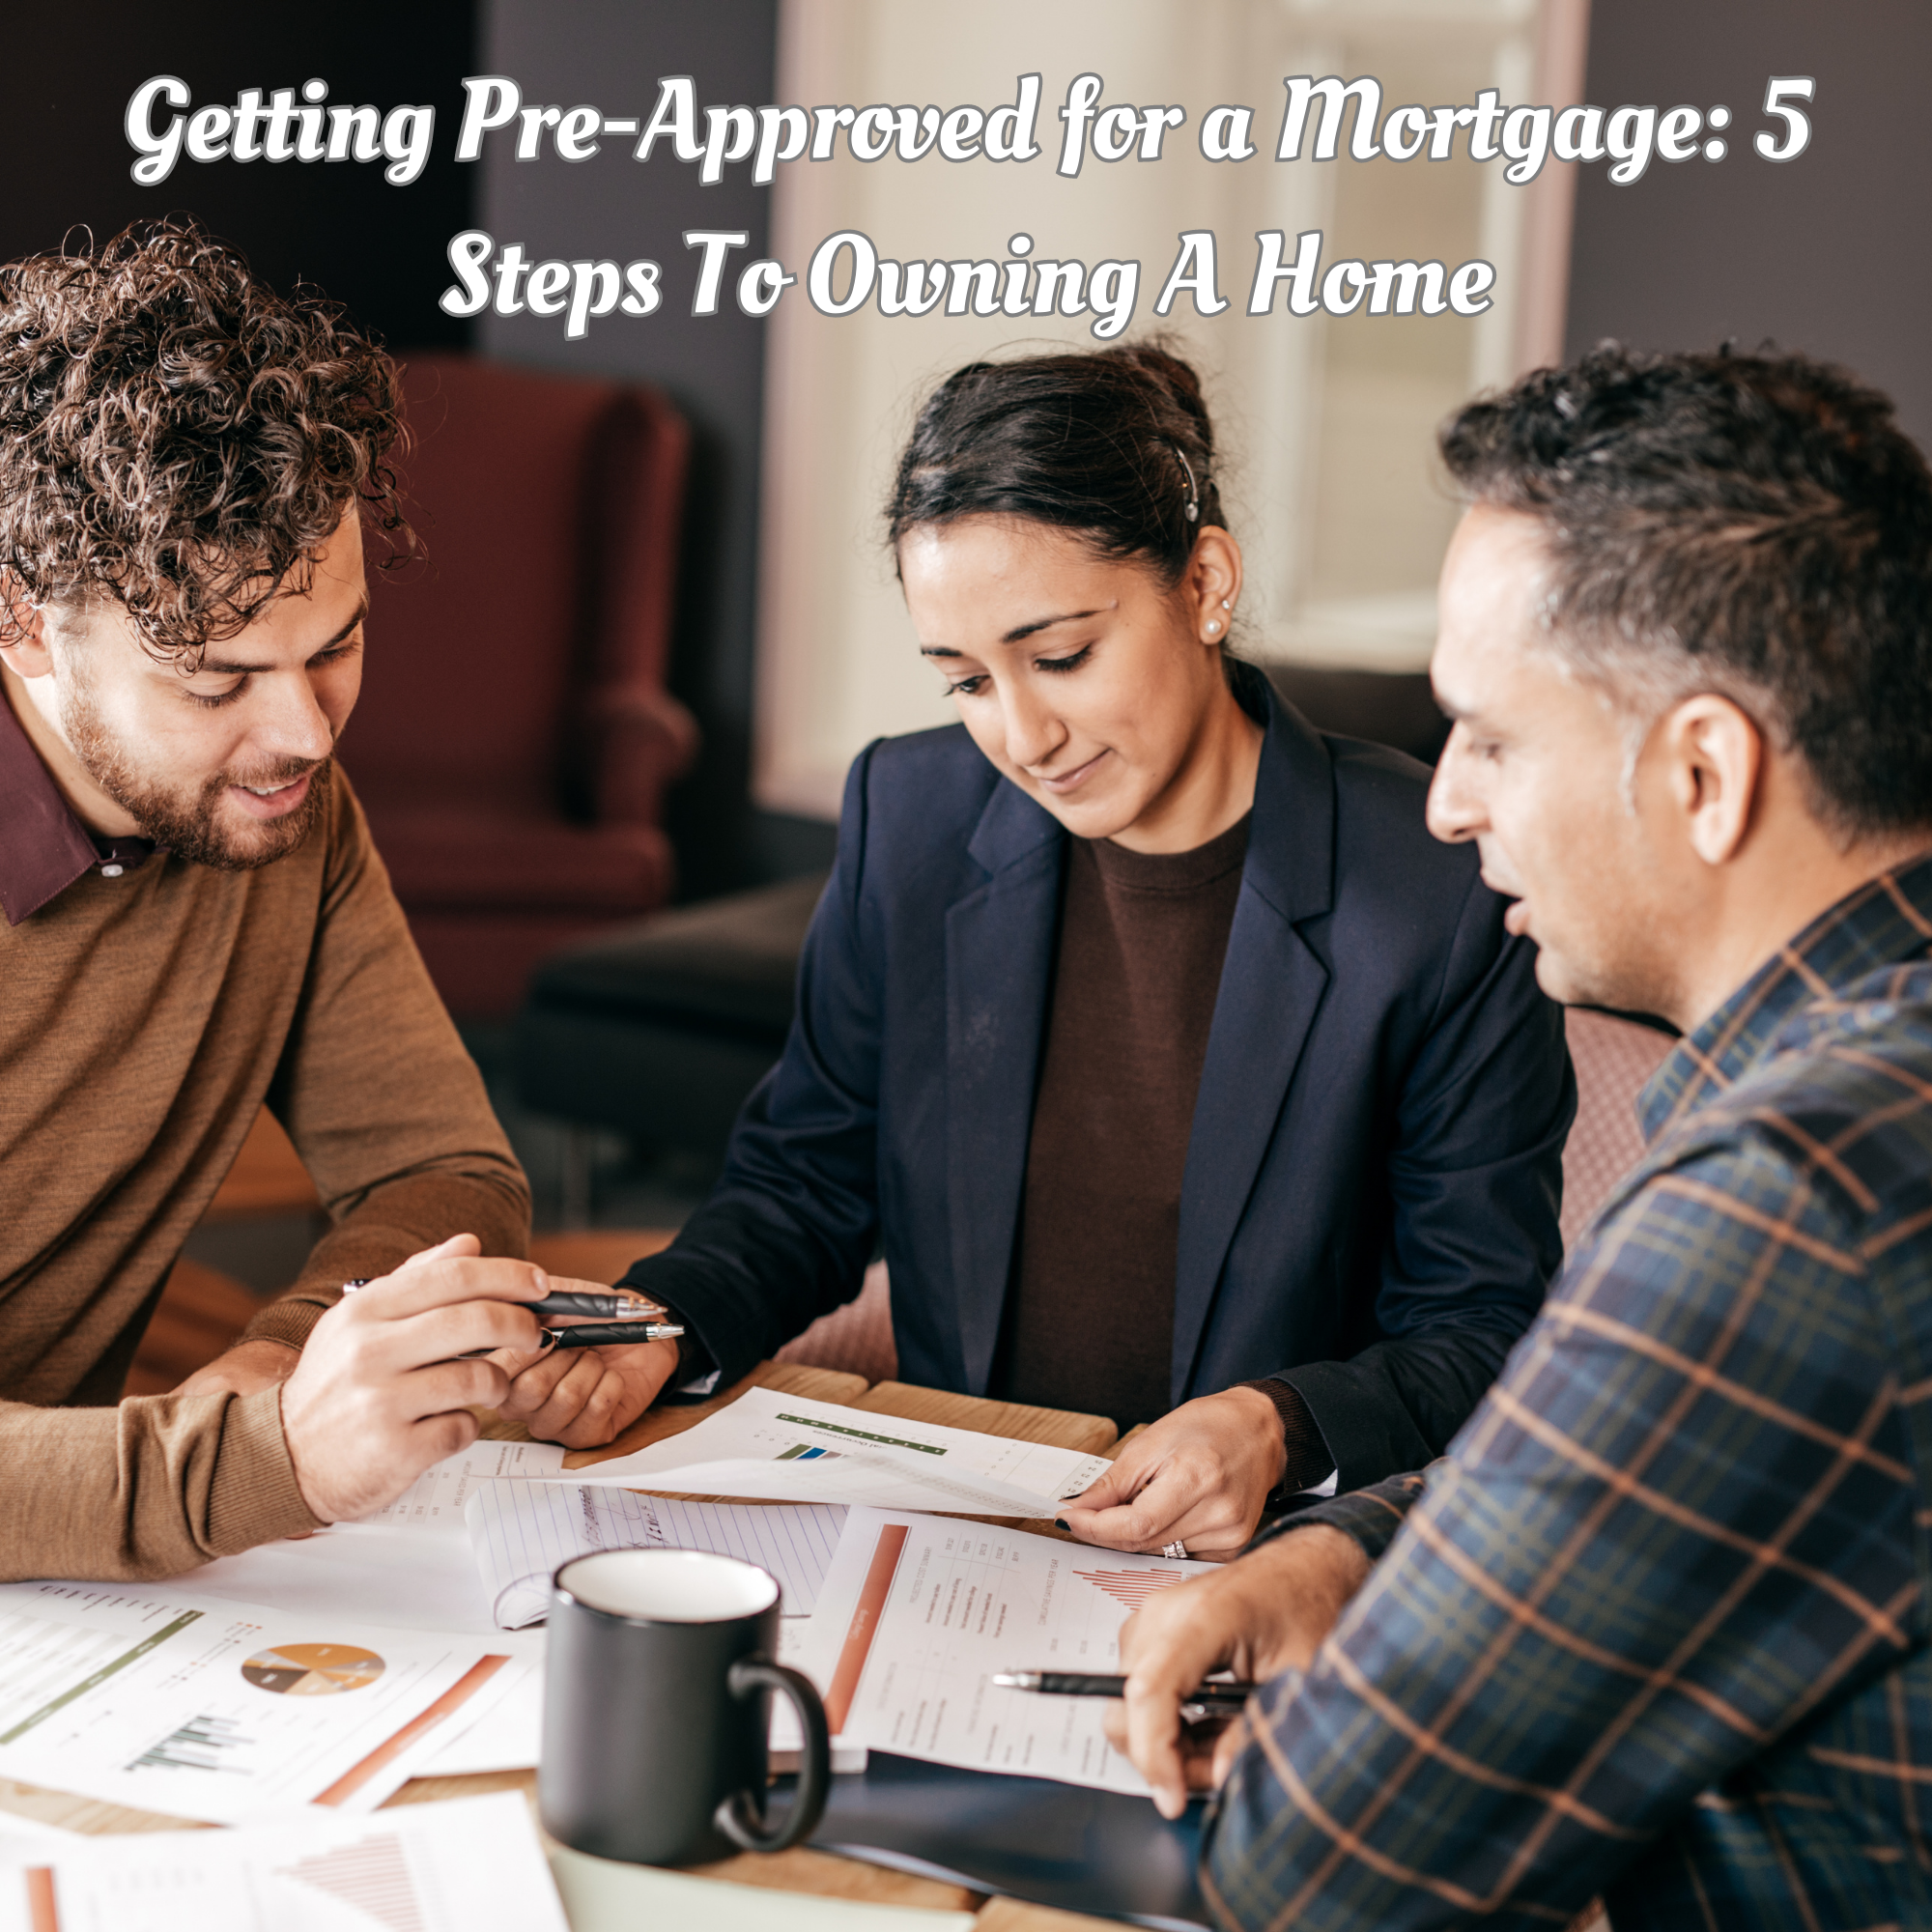 Getting Pre-Approved for a Mortgage: 5 Steps To Owning A Home